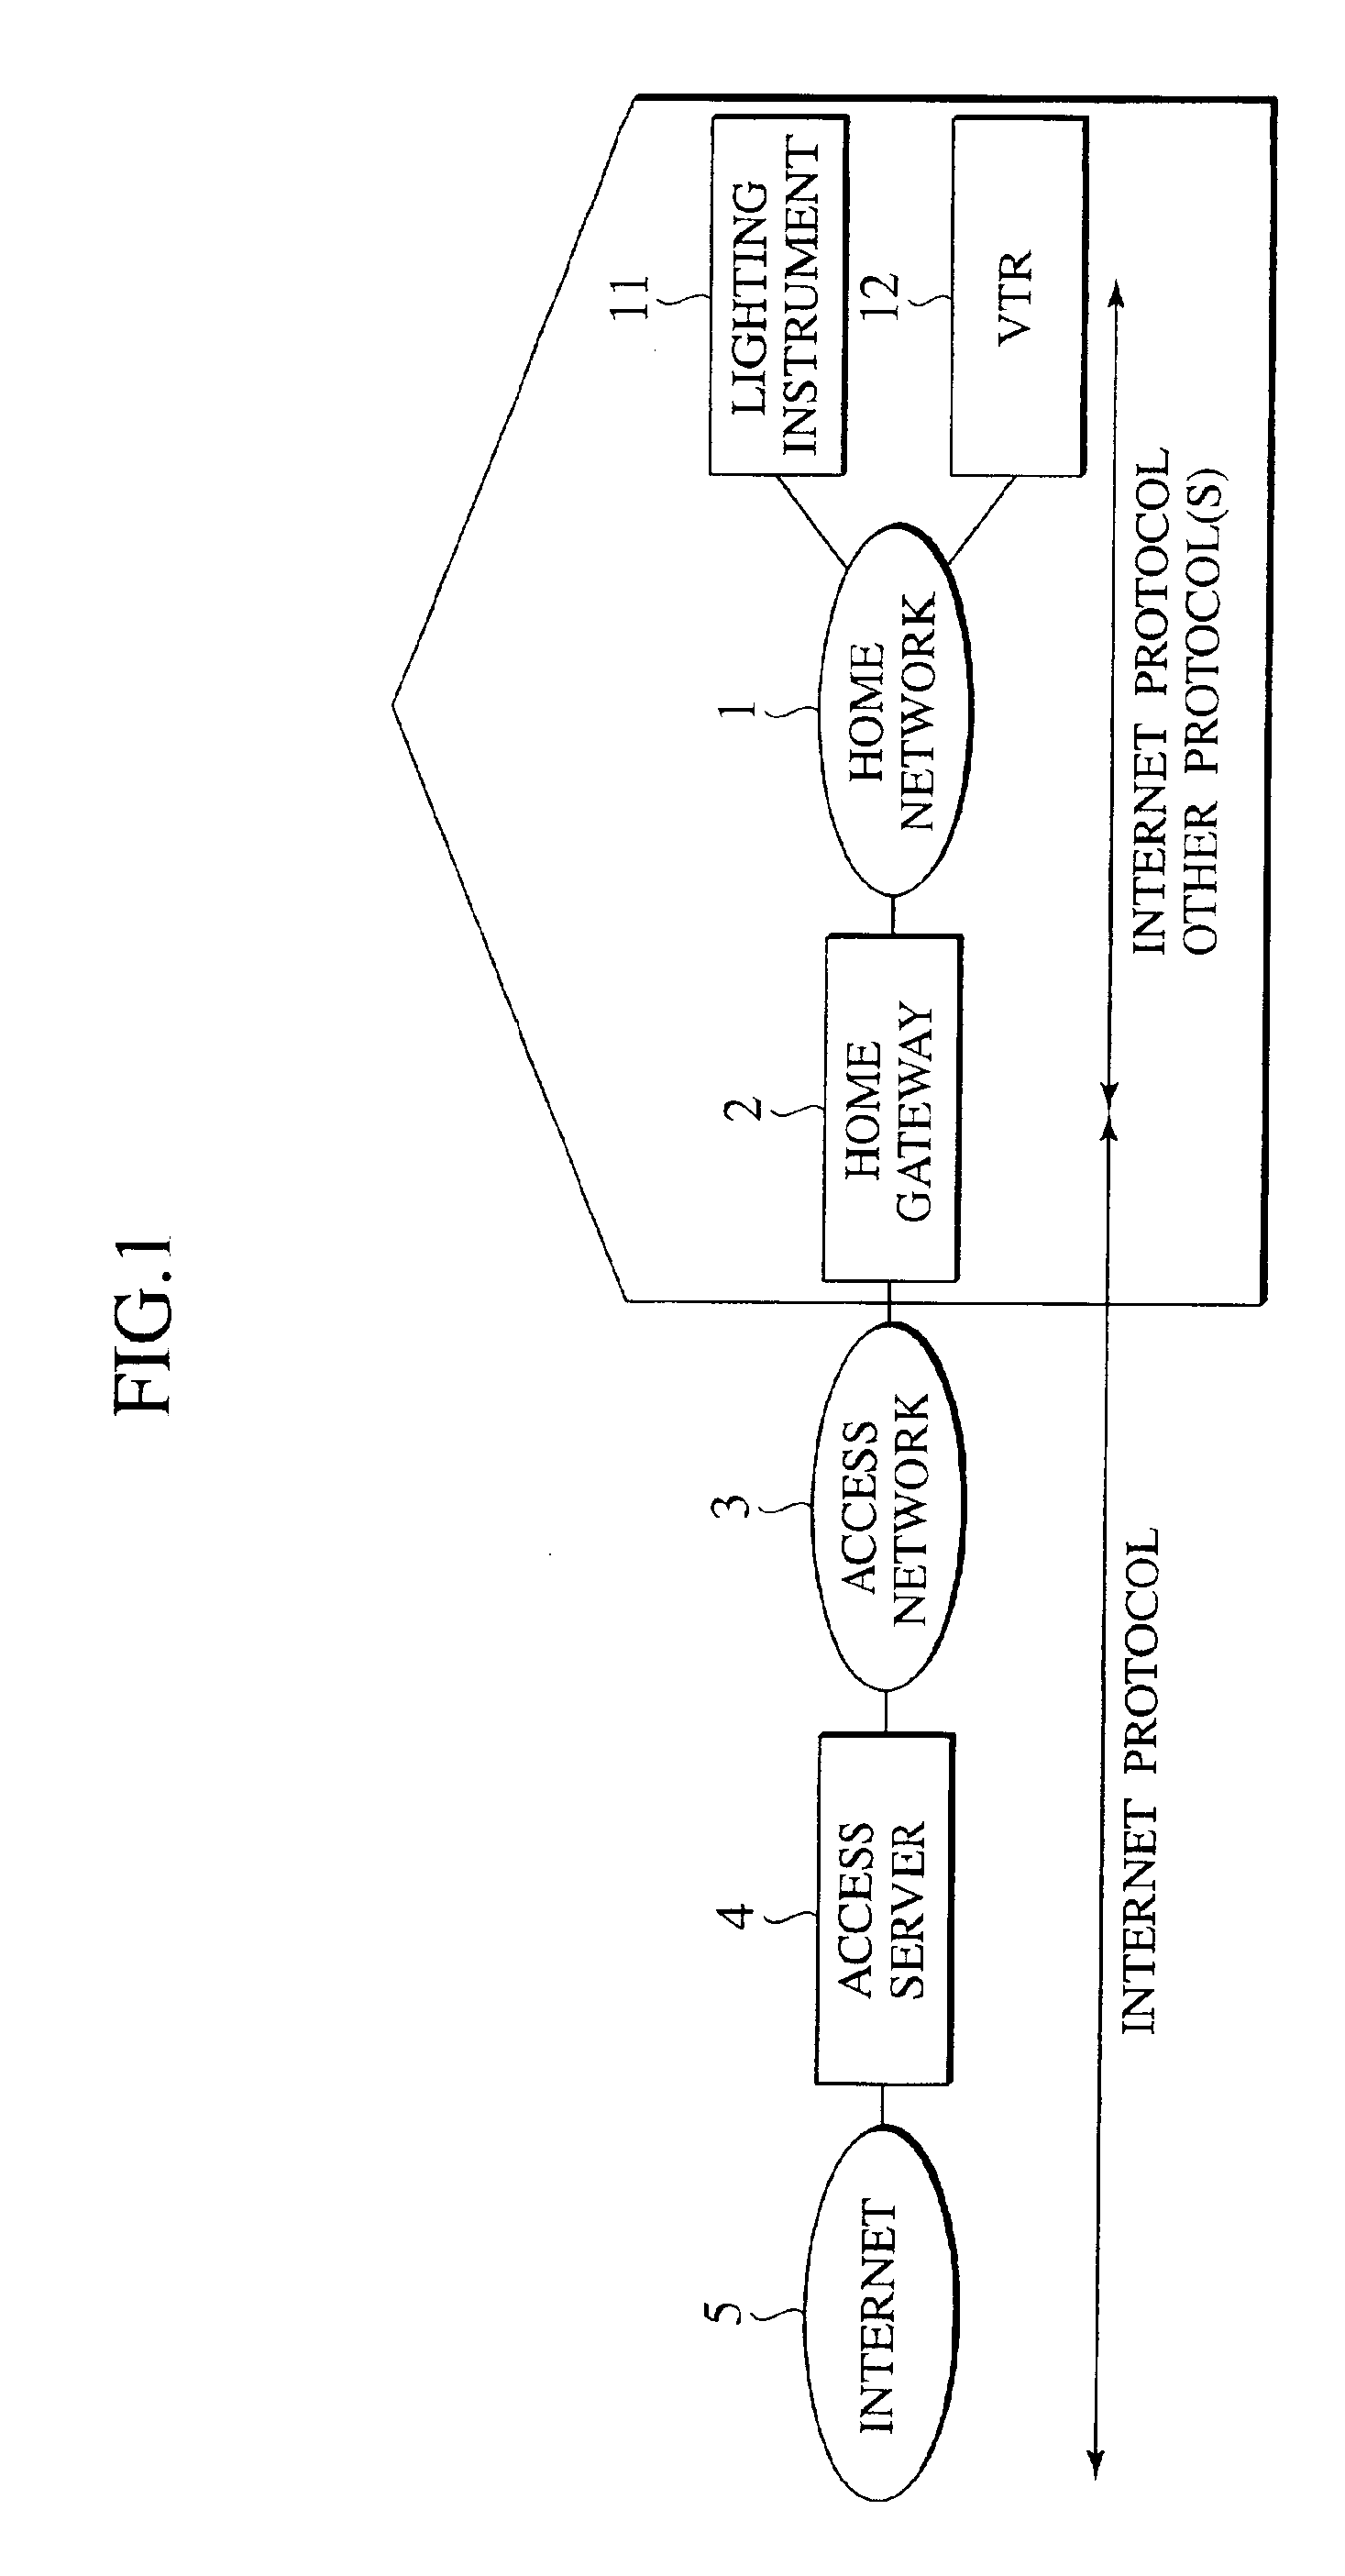 Communication system using home gateway and access server for preventing attacks to home network